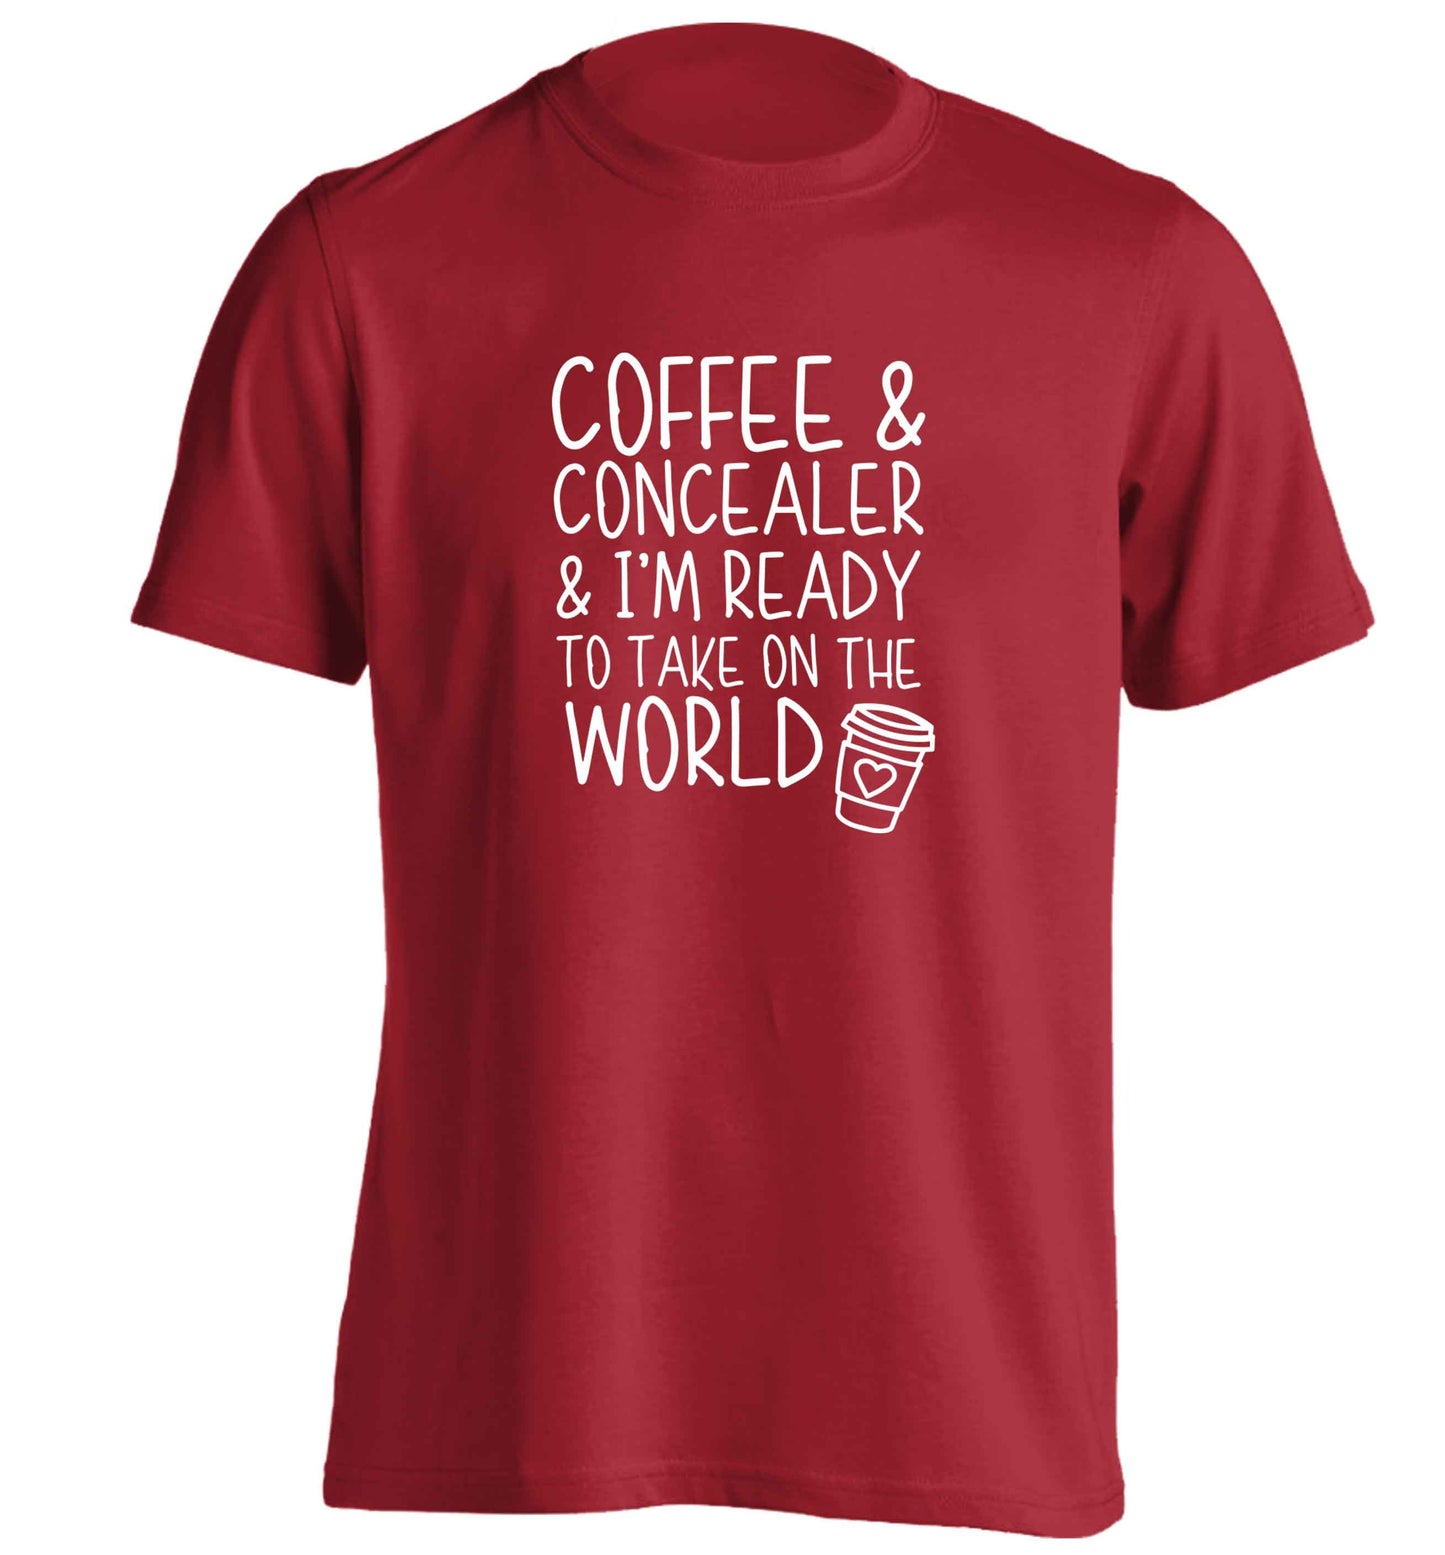 Coffee and concealer and I'm ready to take on the world adults unisex red Tshirt 2XL